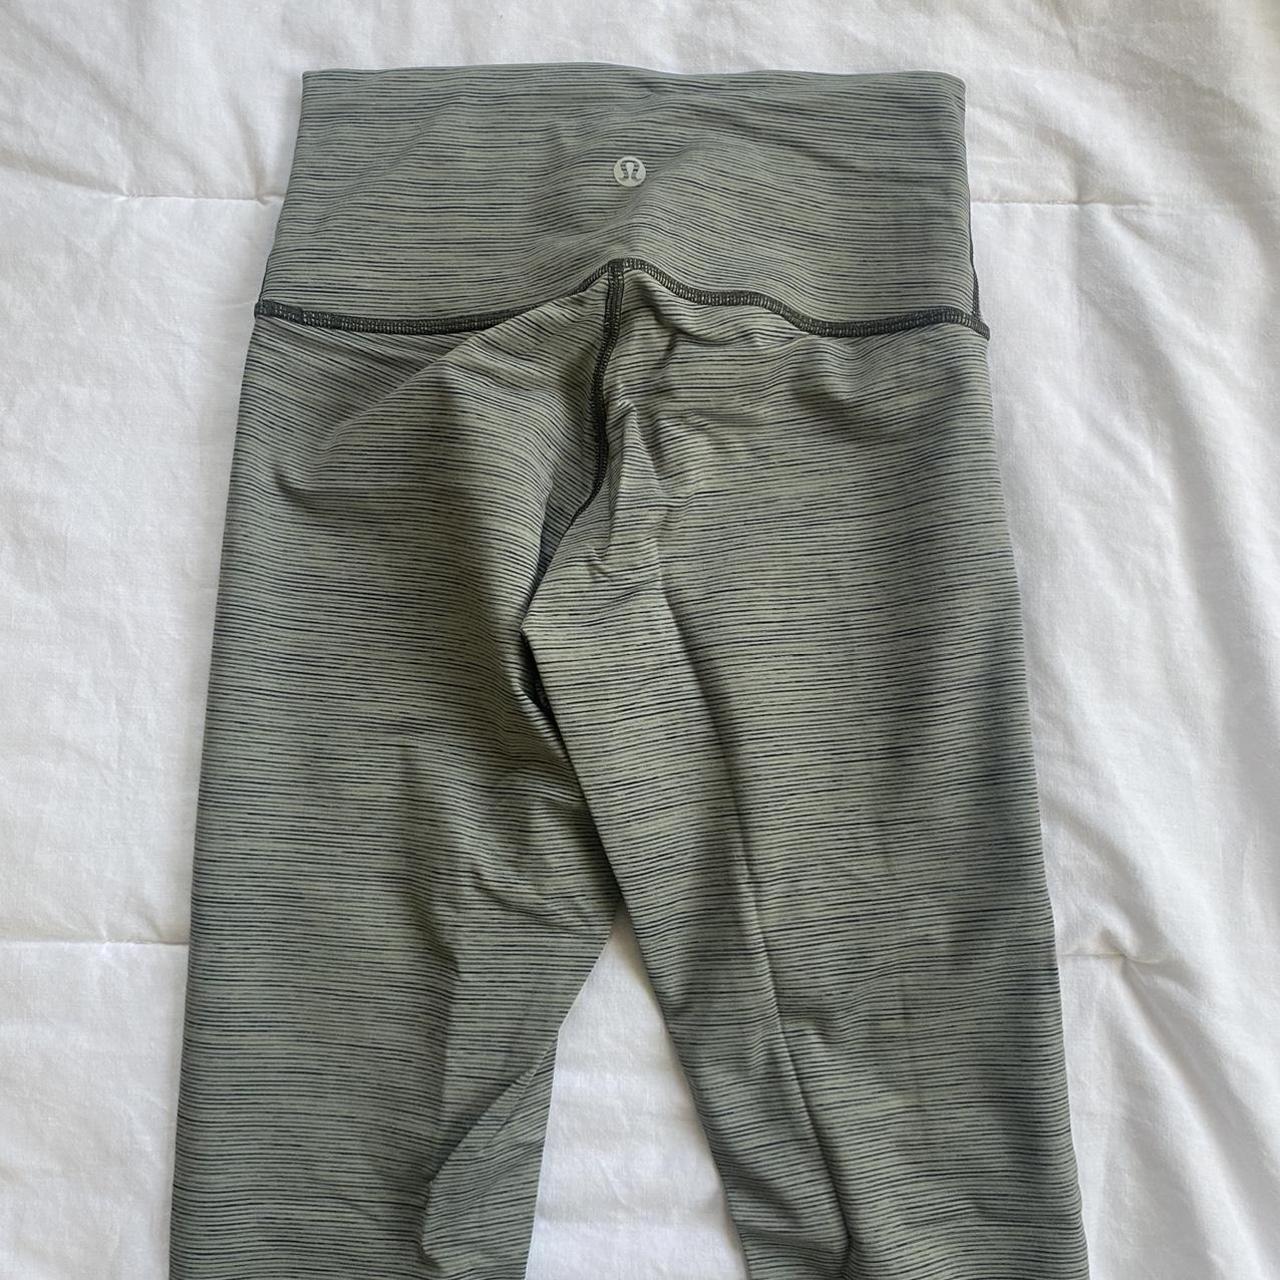 Lululemon wunder under luxtreme wee are from space - Depop